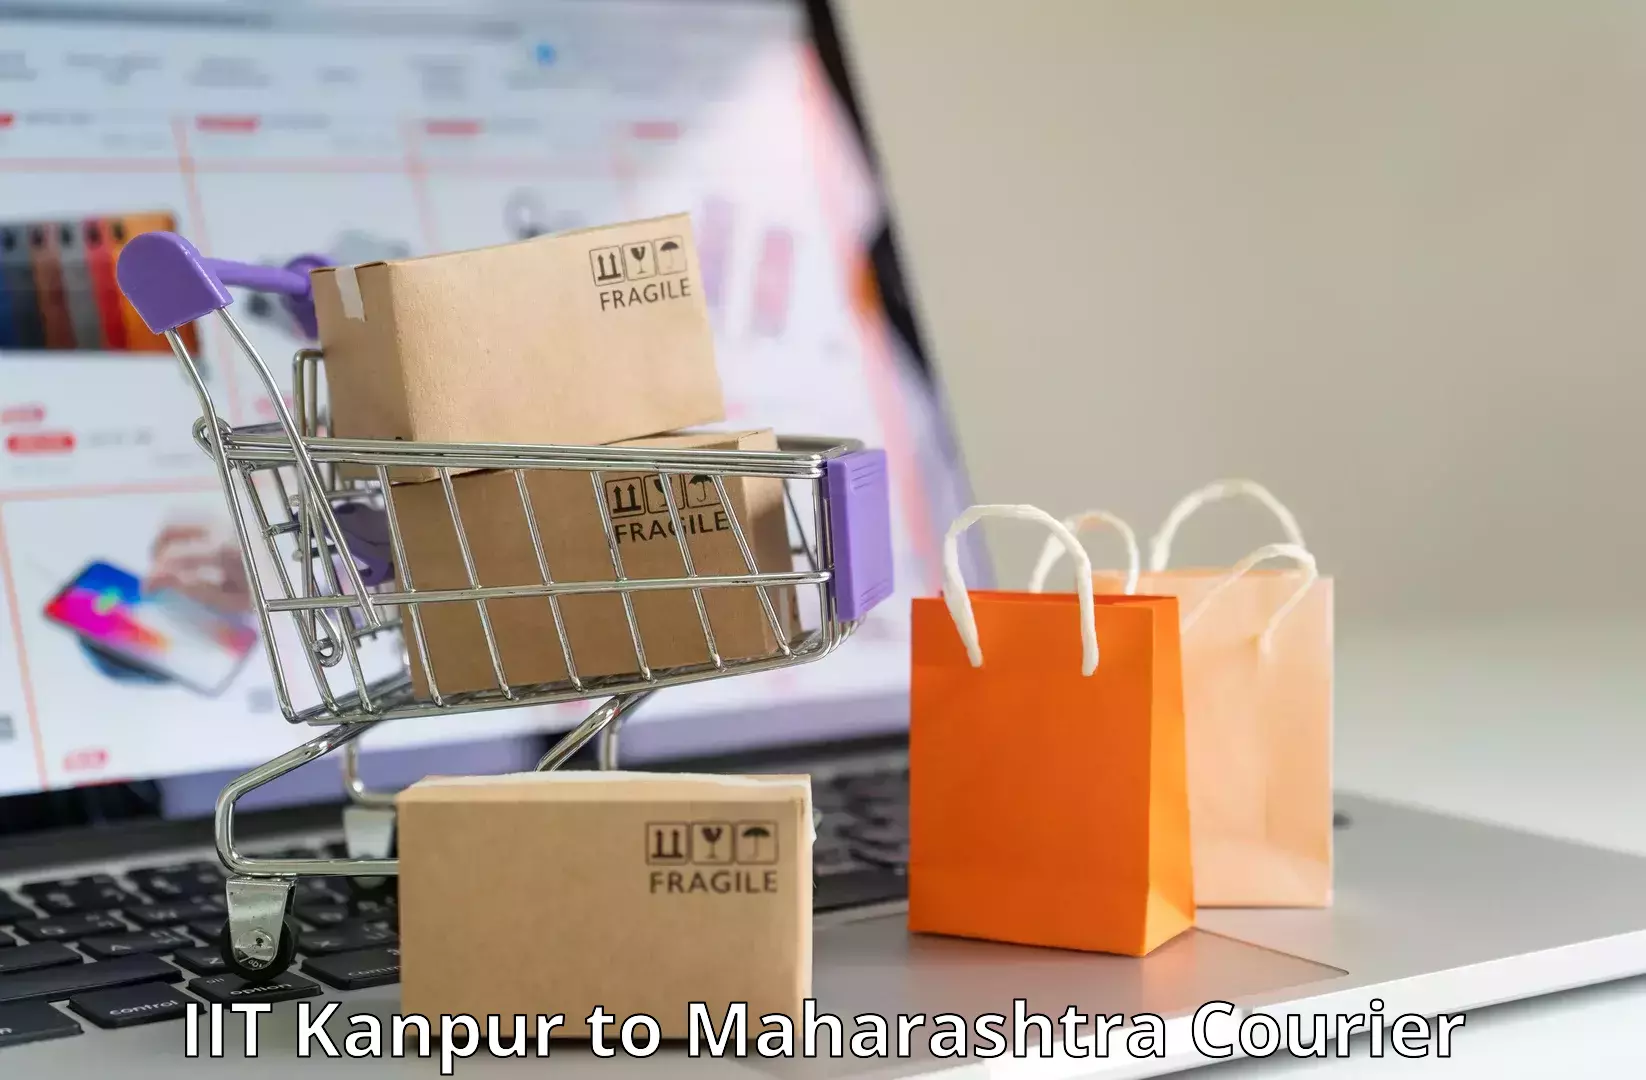 Cash on delivery service IIT Kanpur to Karmala